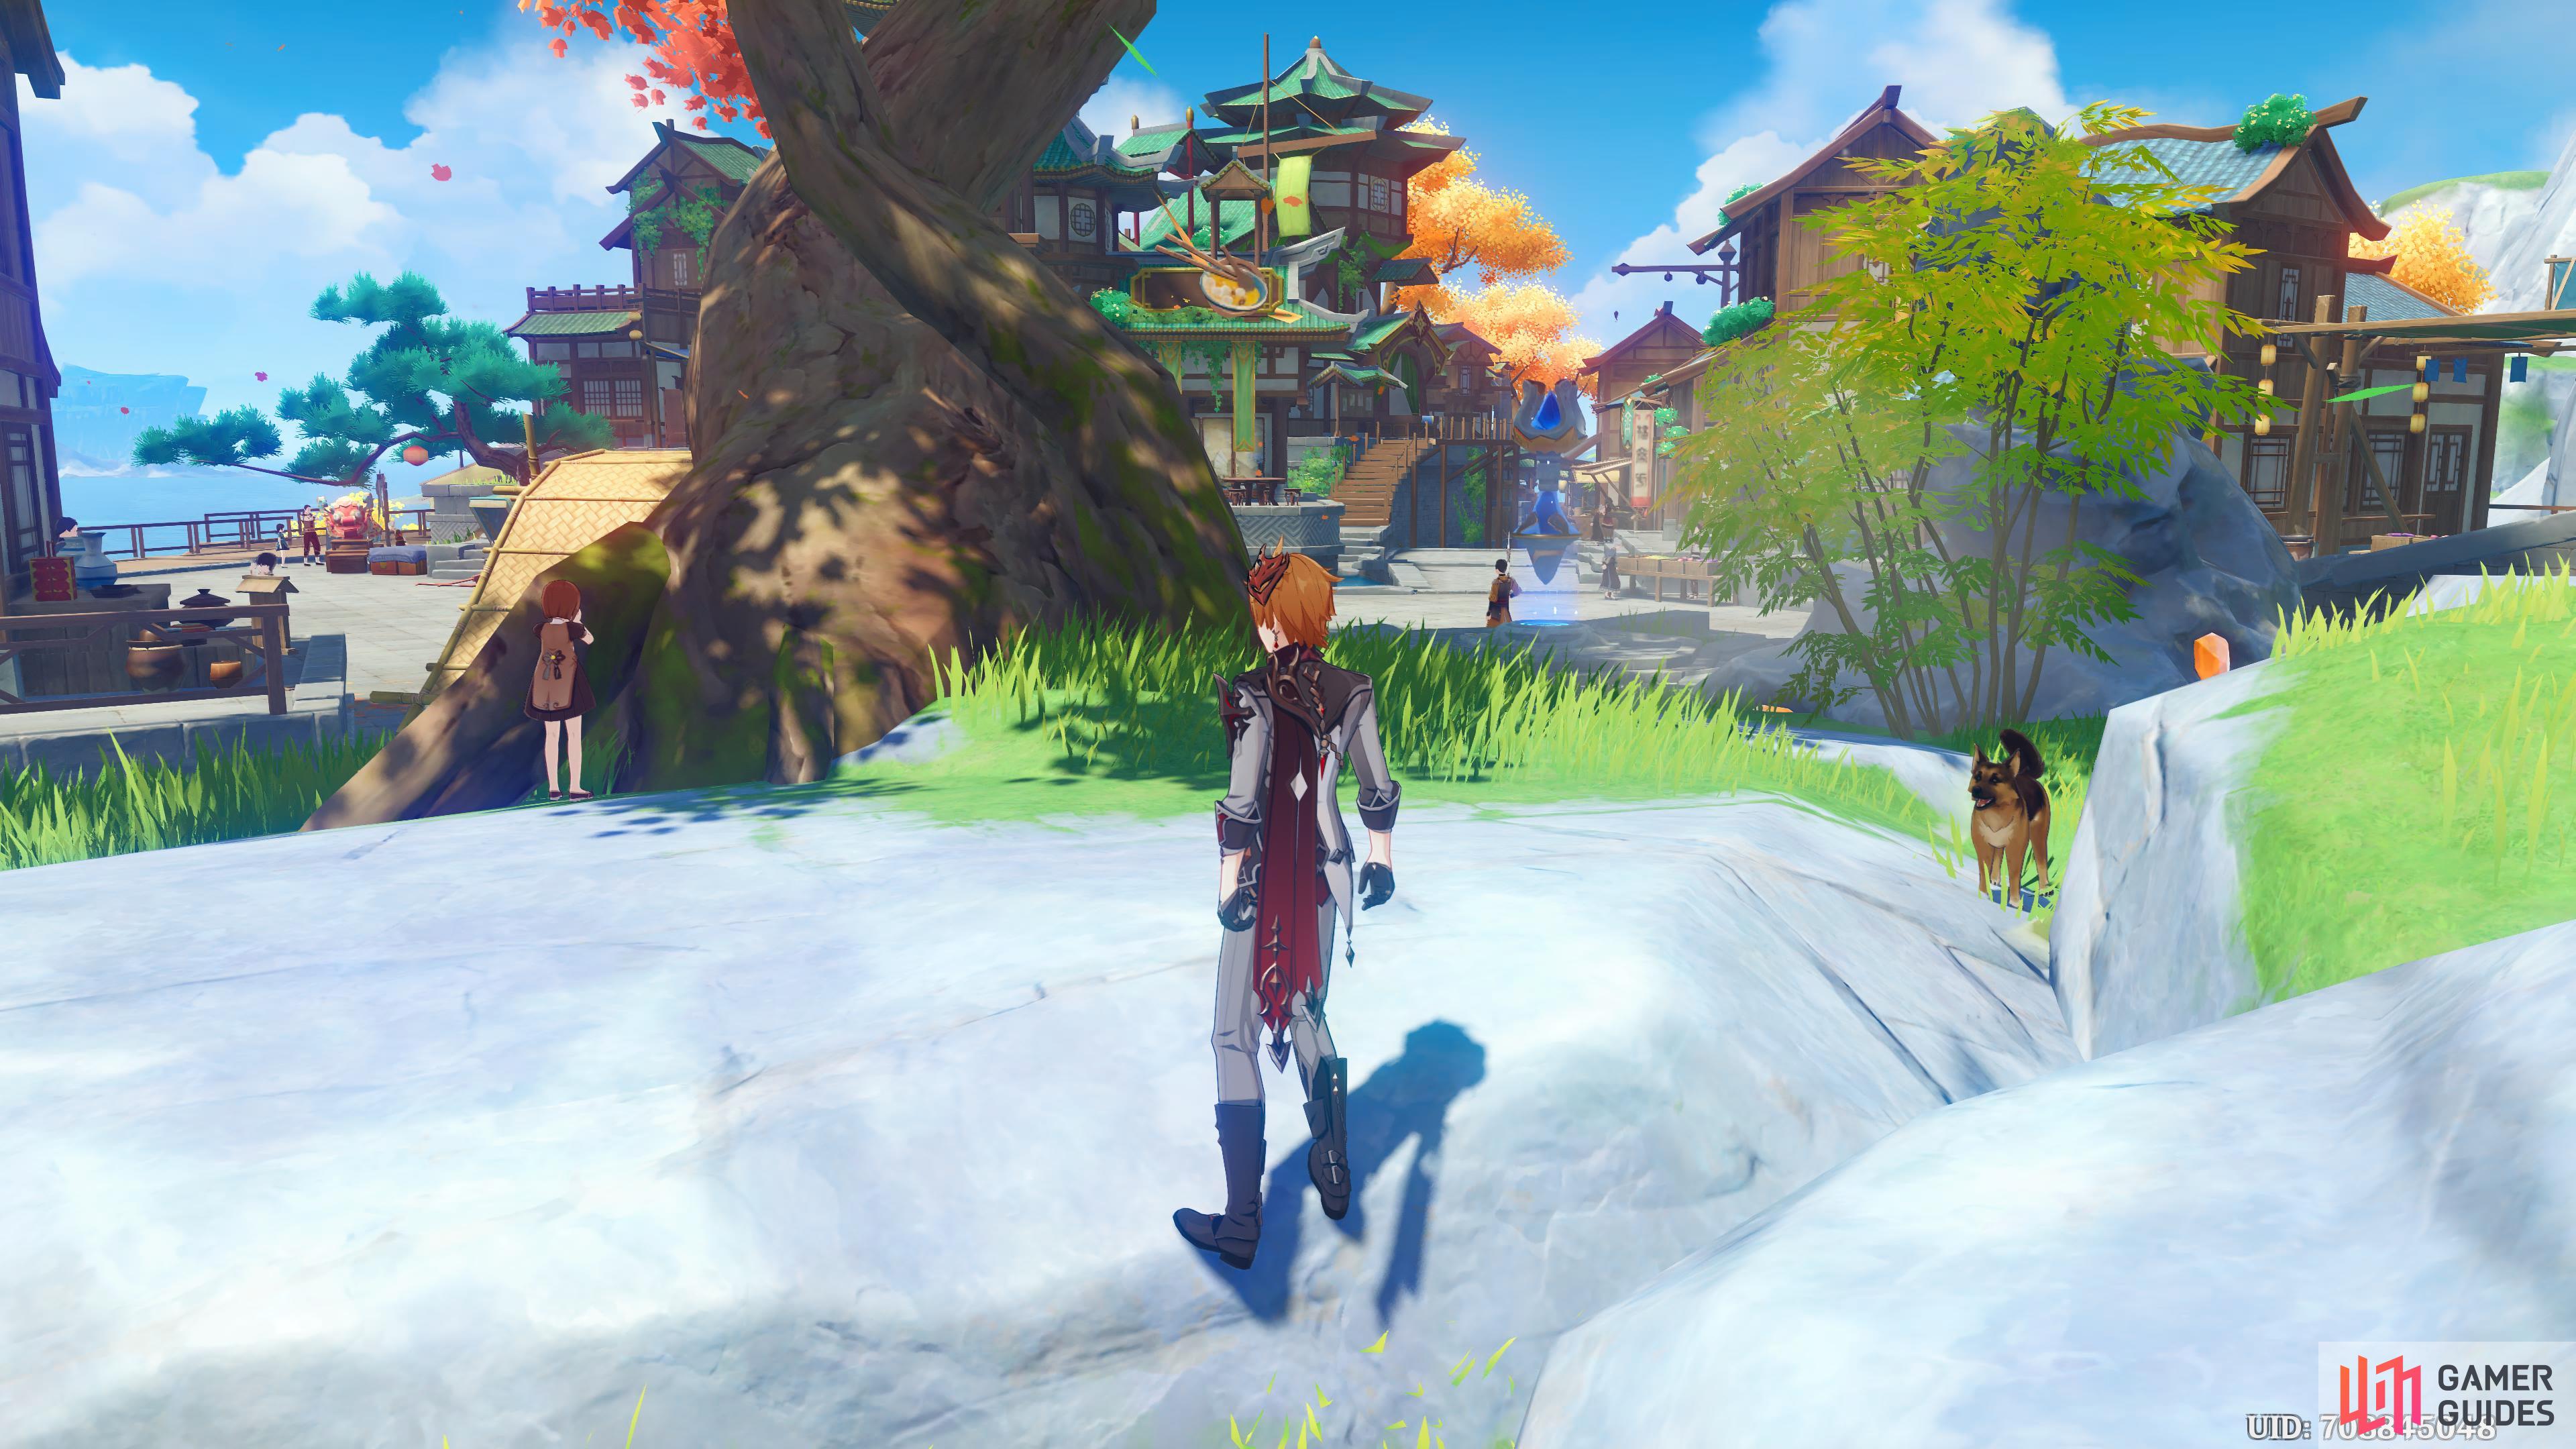 and Little Le can be found behind the big tree, west of the teleport waypoint.